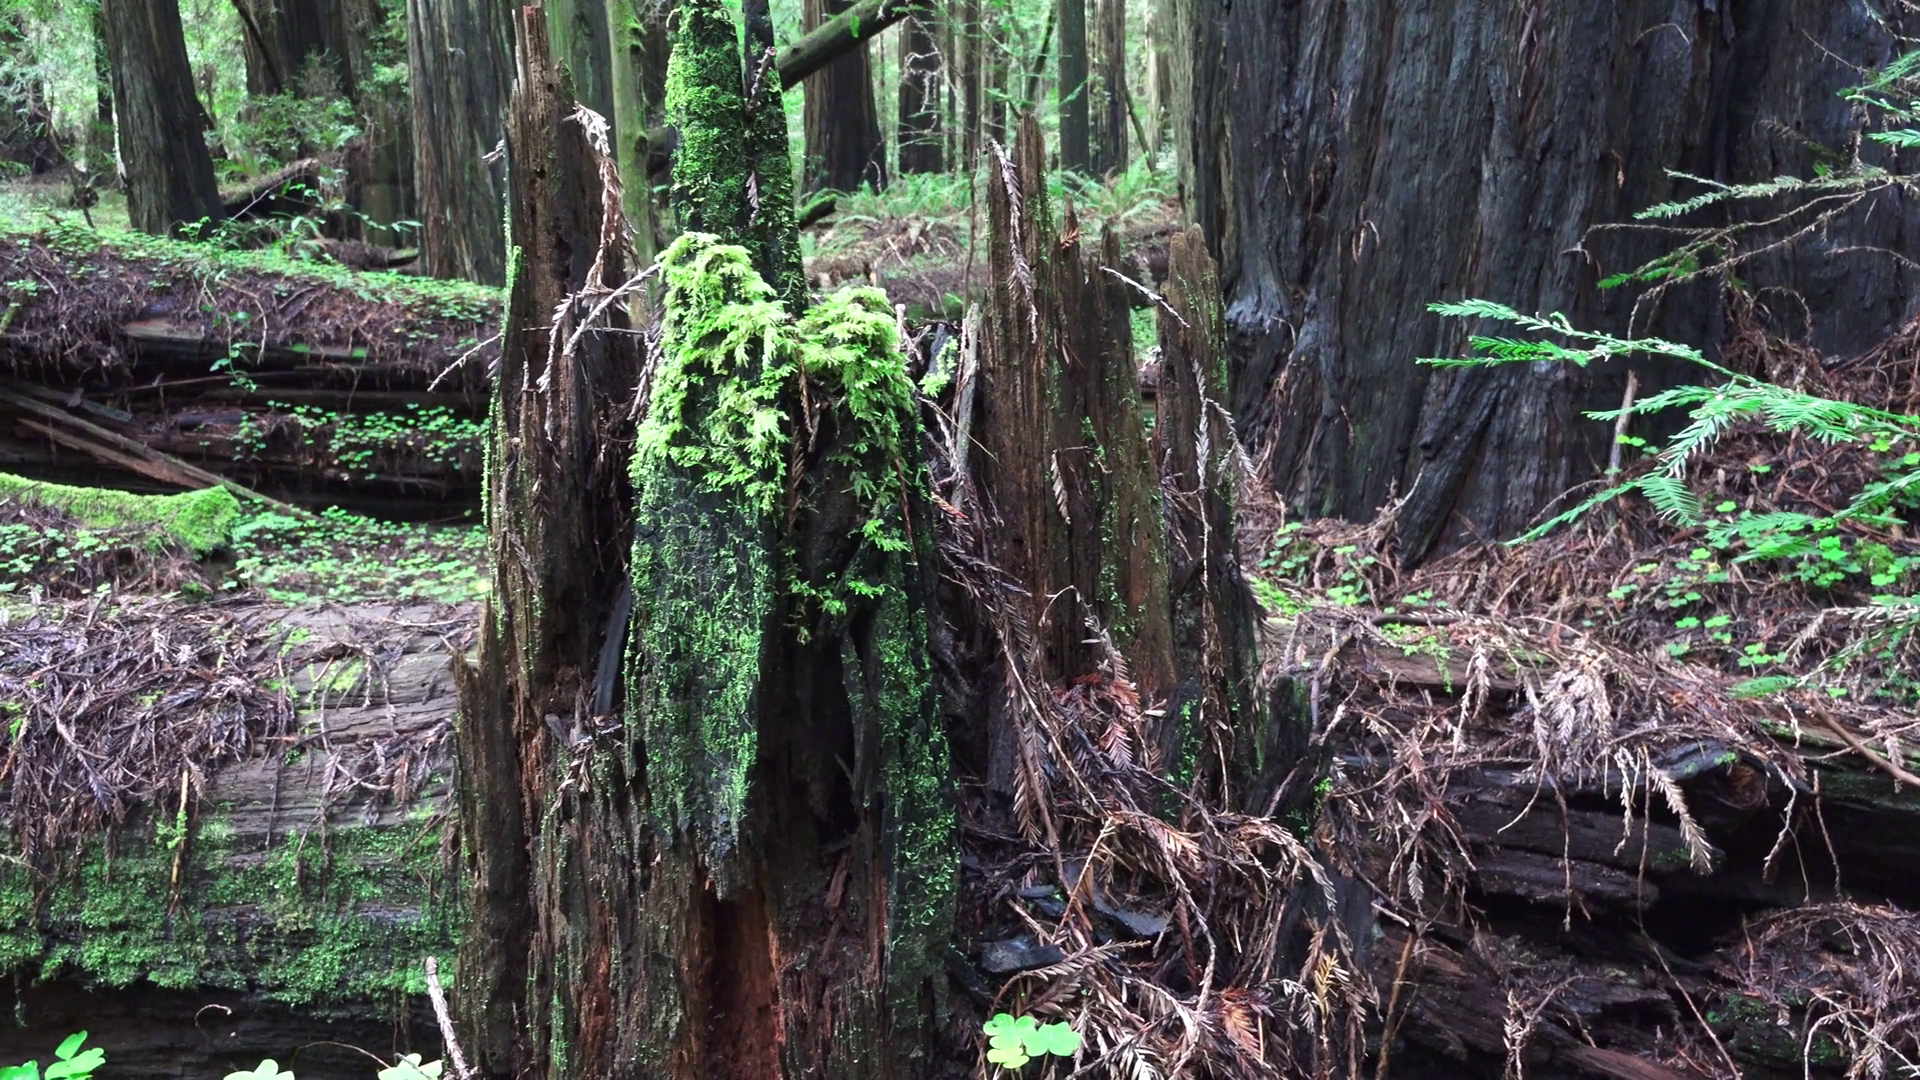 Slider going past the rotting tree stump in the redwood forest where ...